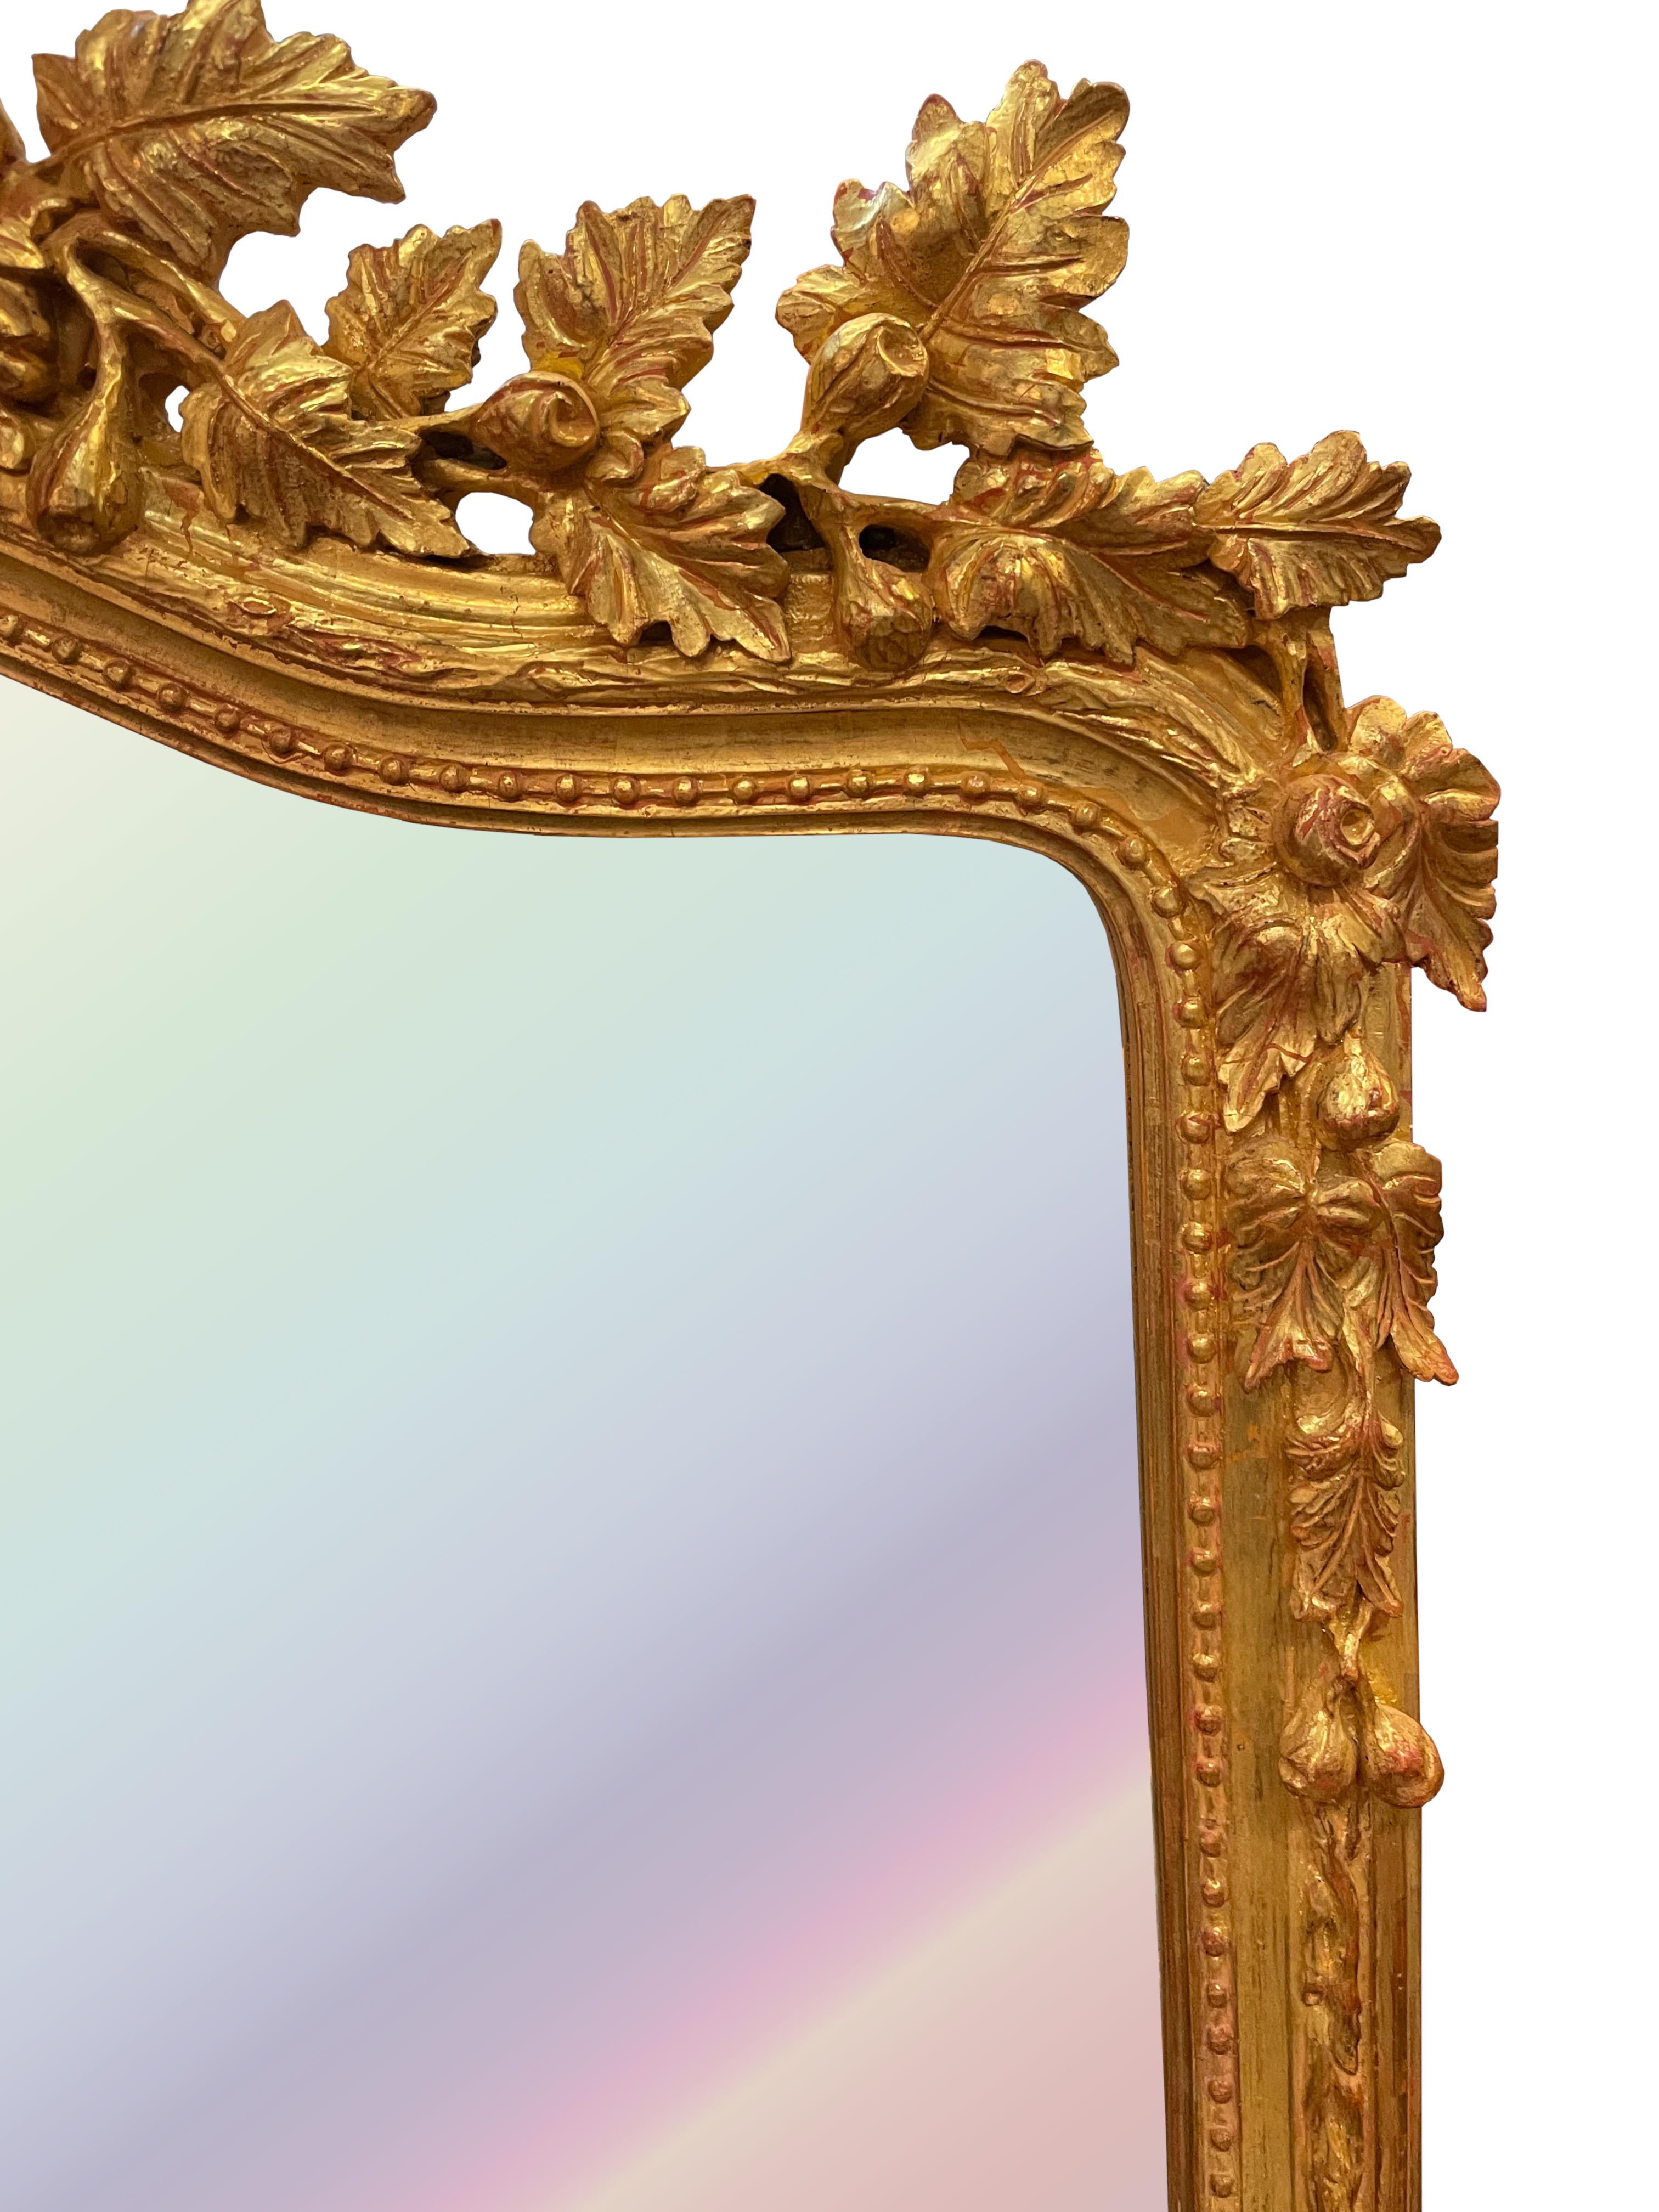 
Louis XV Style Giltwood Mirror
The beveled arched mirror plate within a bead and vine-carved border, the serpentine arched crest carved with fruited leaves and a bow-tied ribbon. 
65 by 36 in. (165.1 x 91.44 cm.)